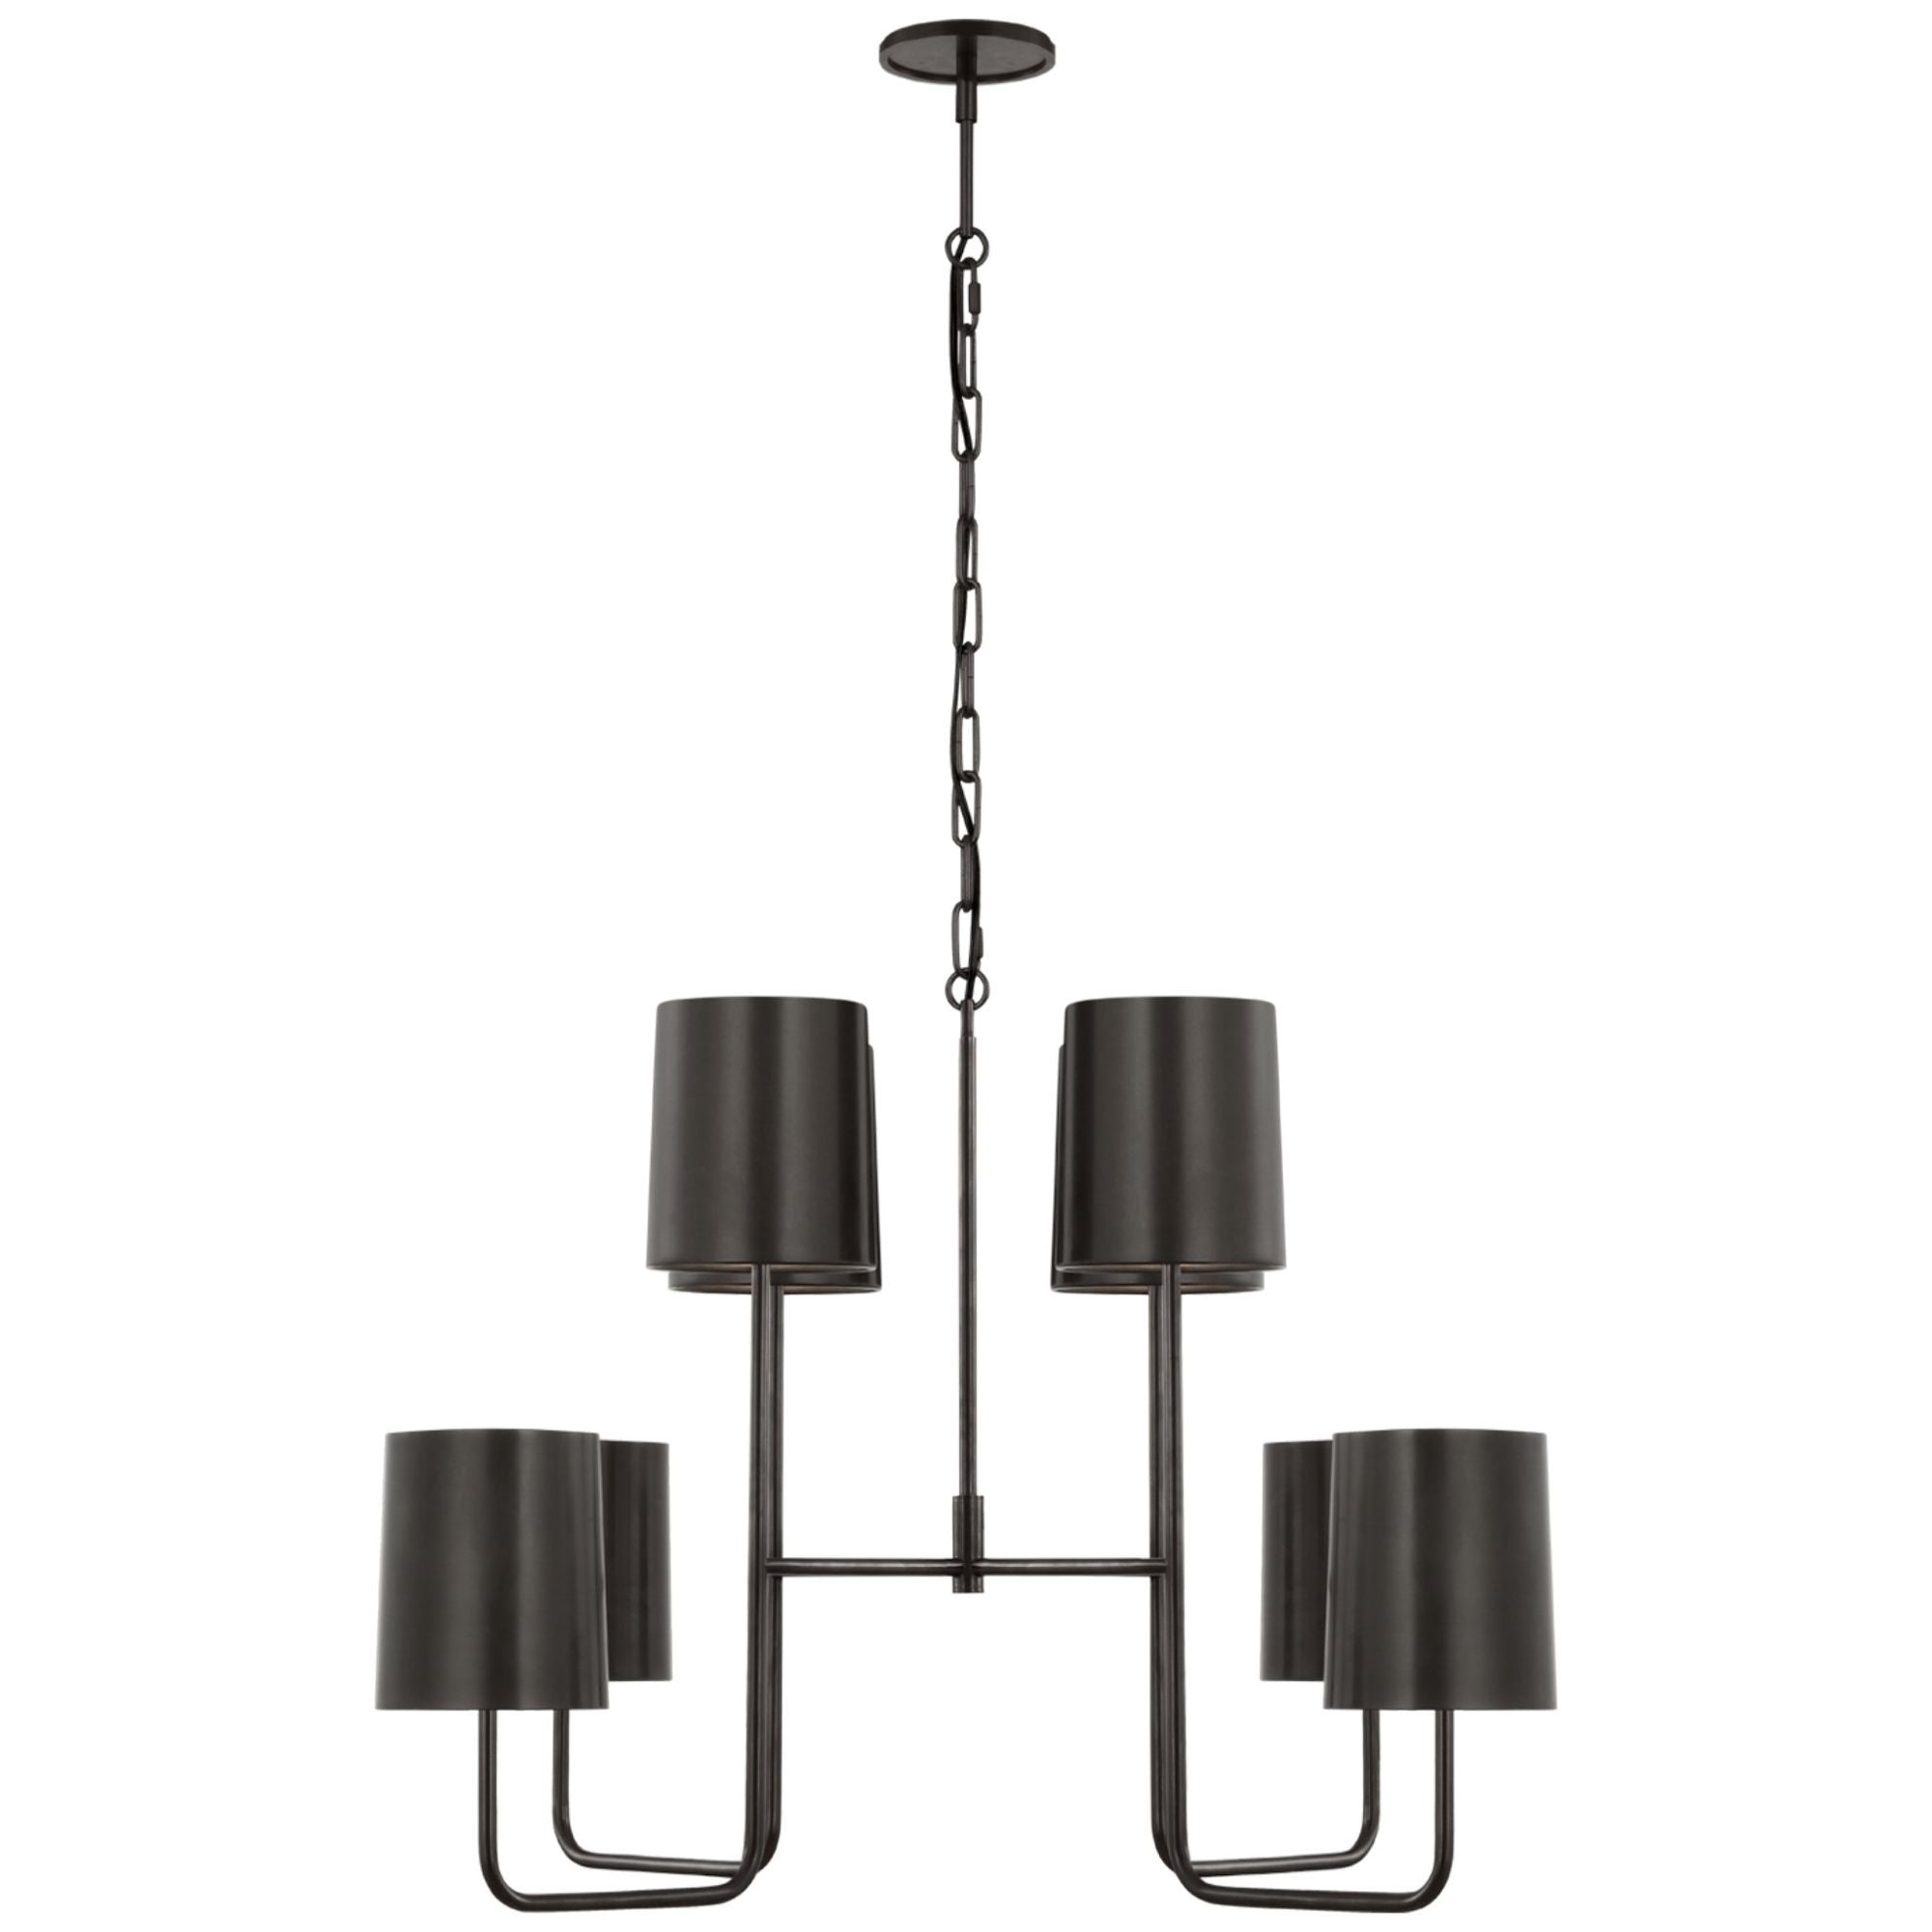 Barbara Barry Go Lightly Extra Large Two Tier Chandelier in Bronze with Bronze Shades